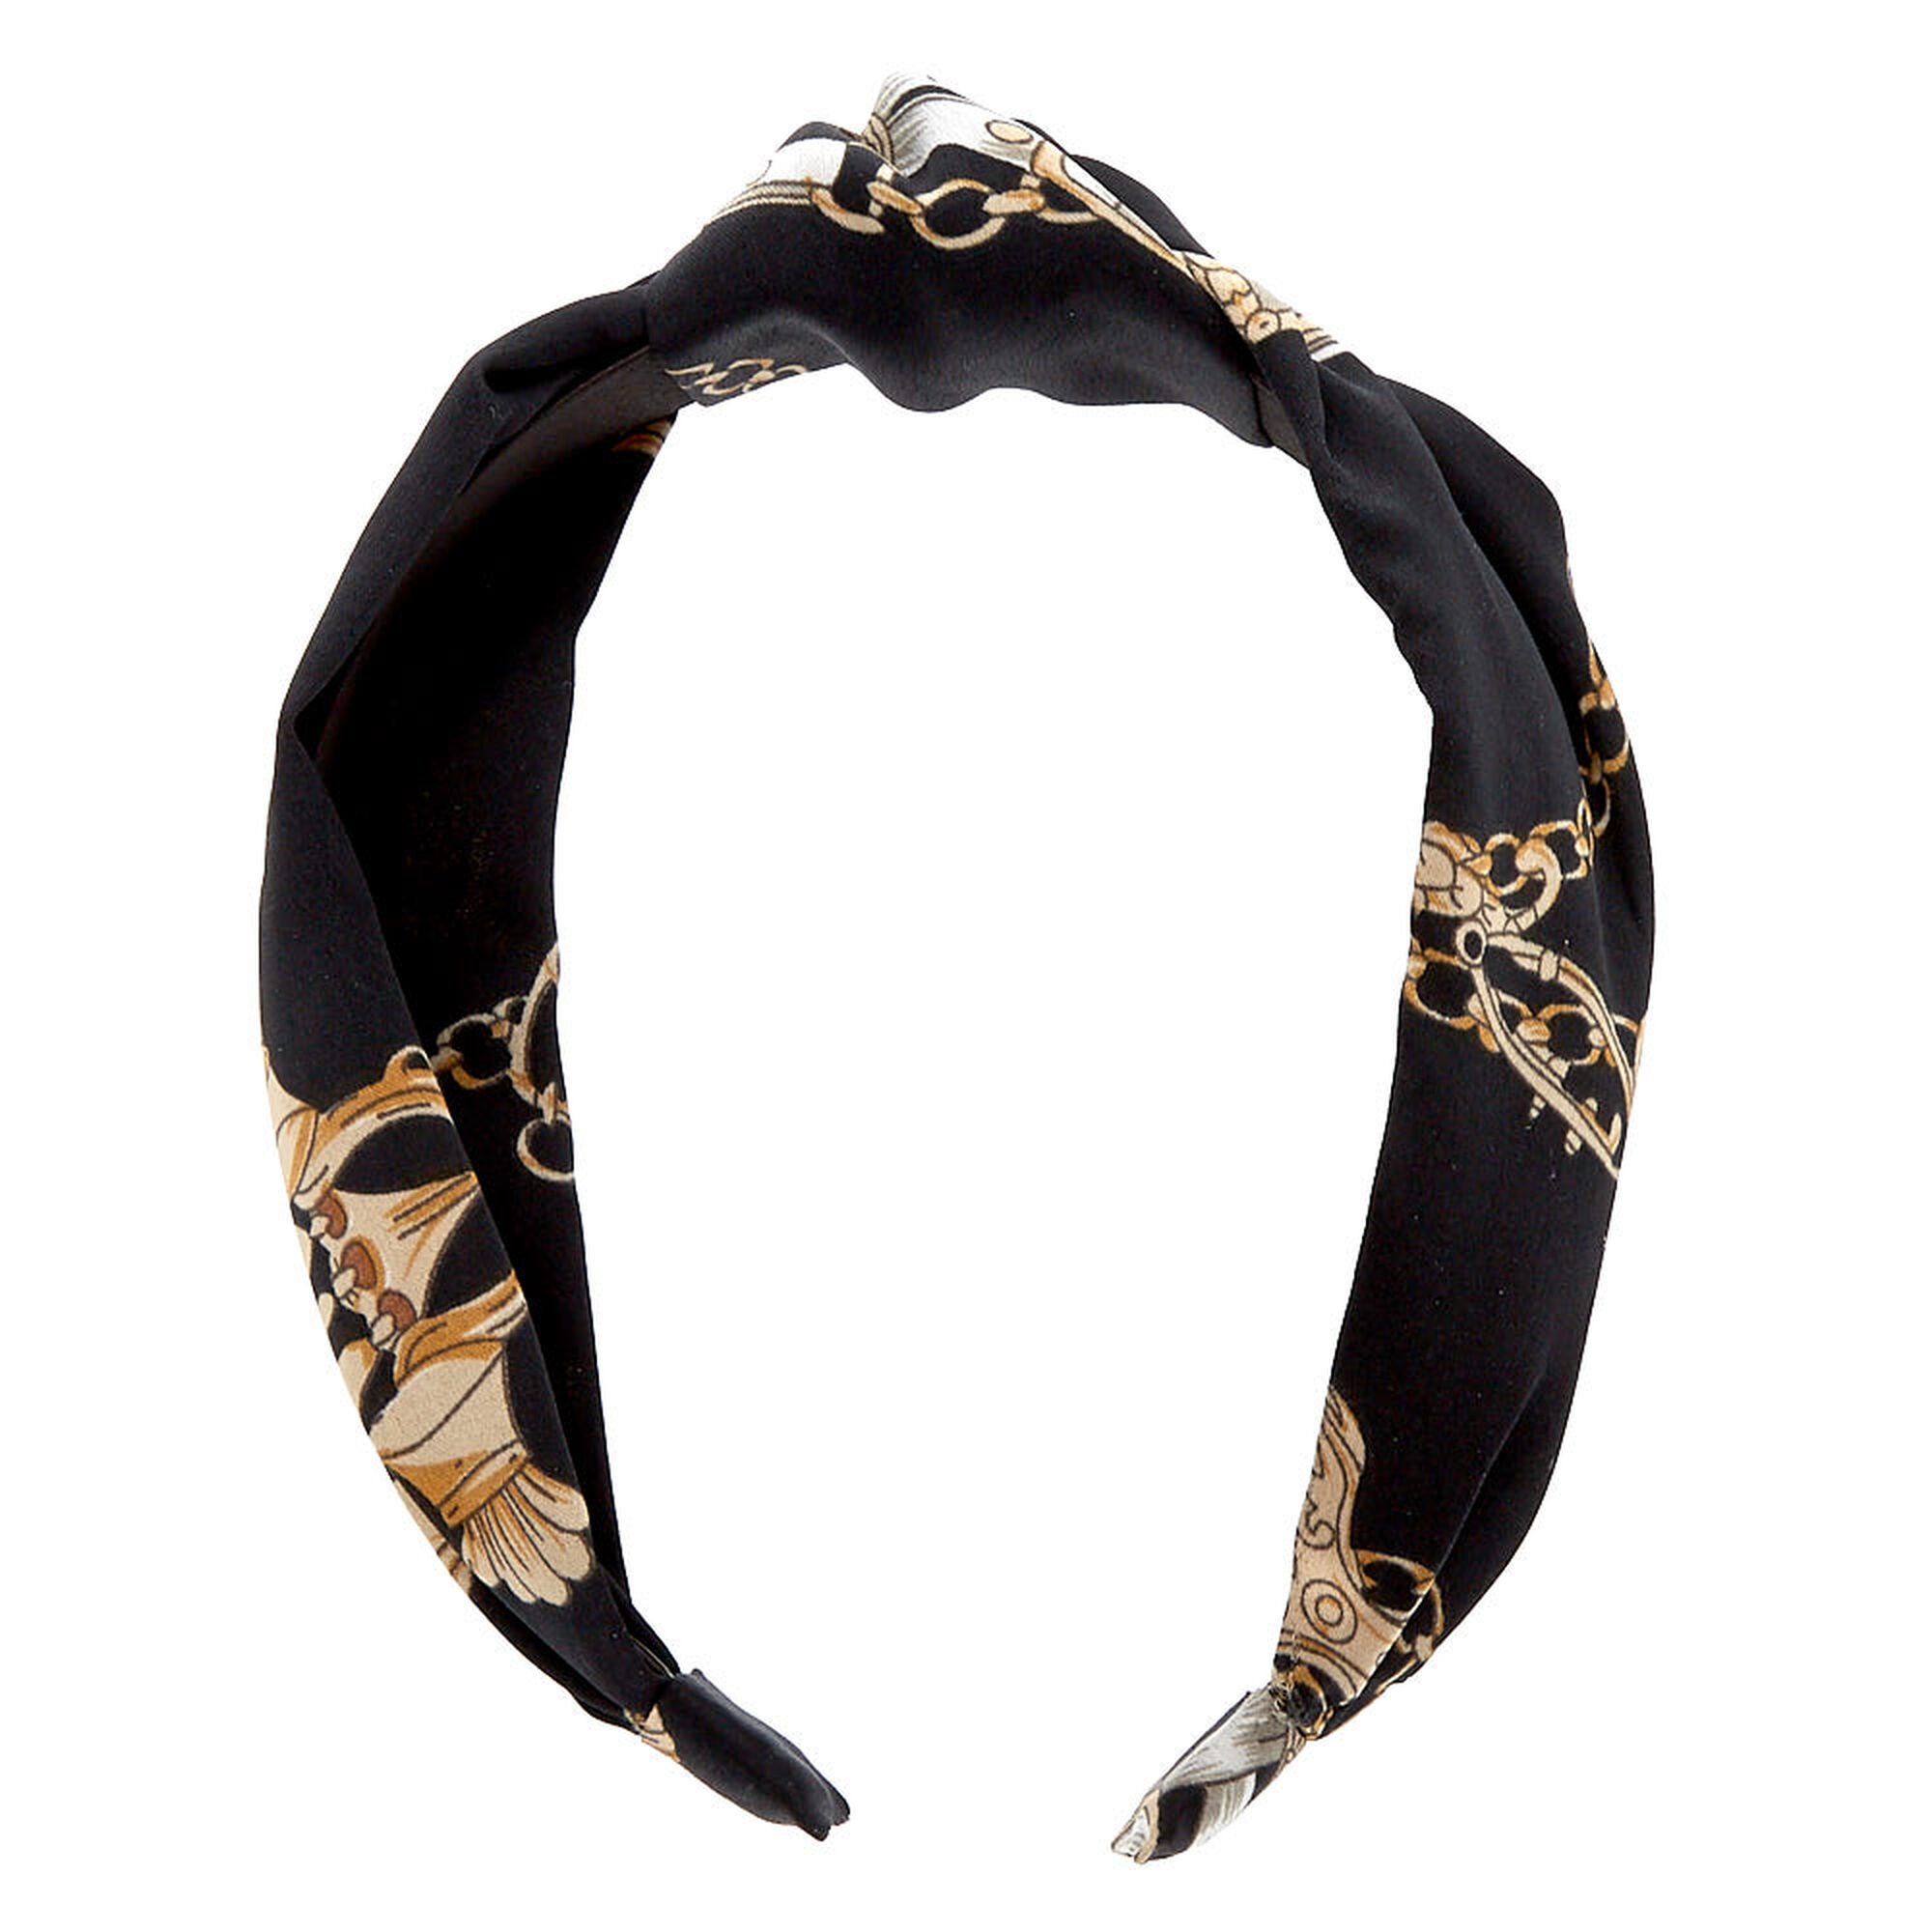 Chain Print Knotted Headband - Black | Claire's